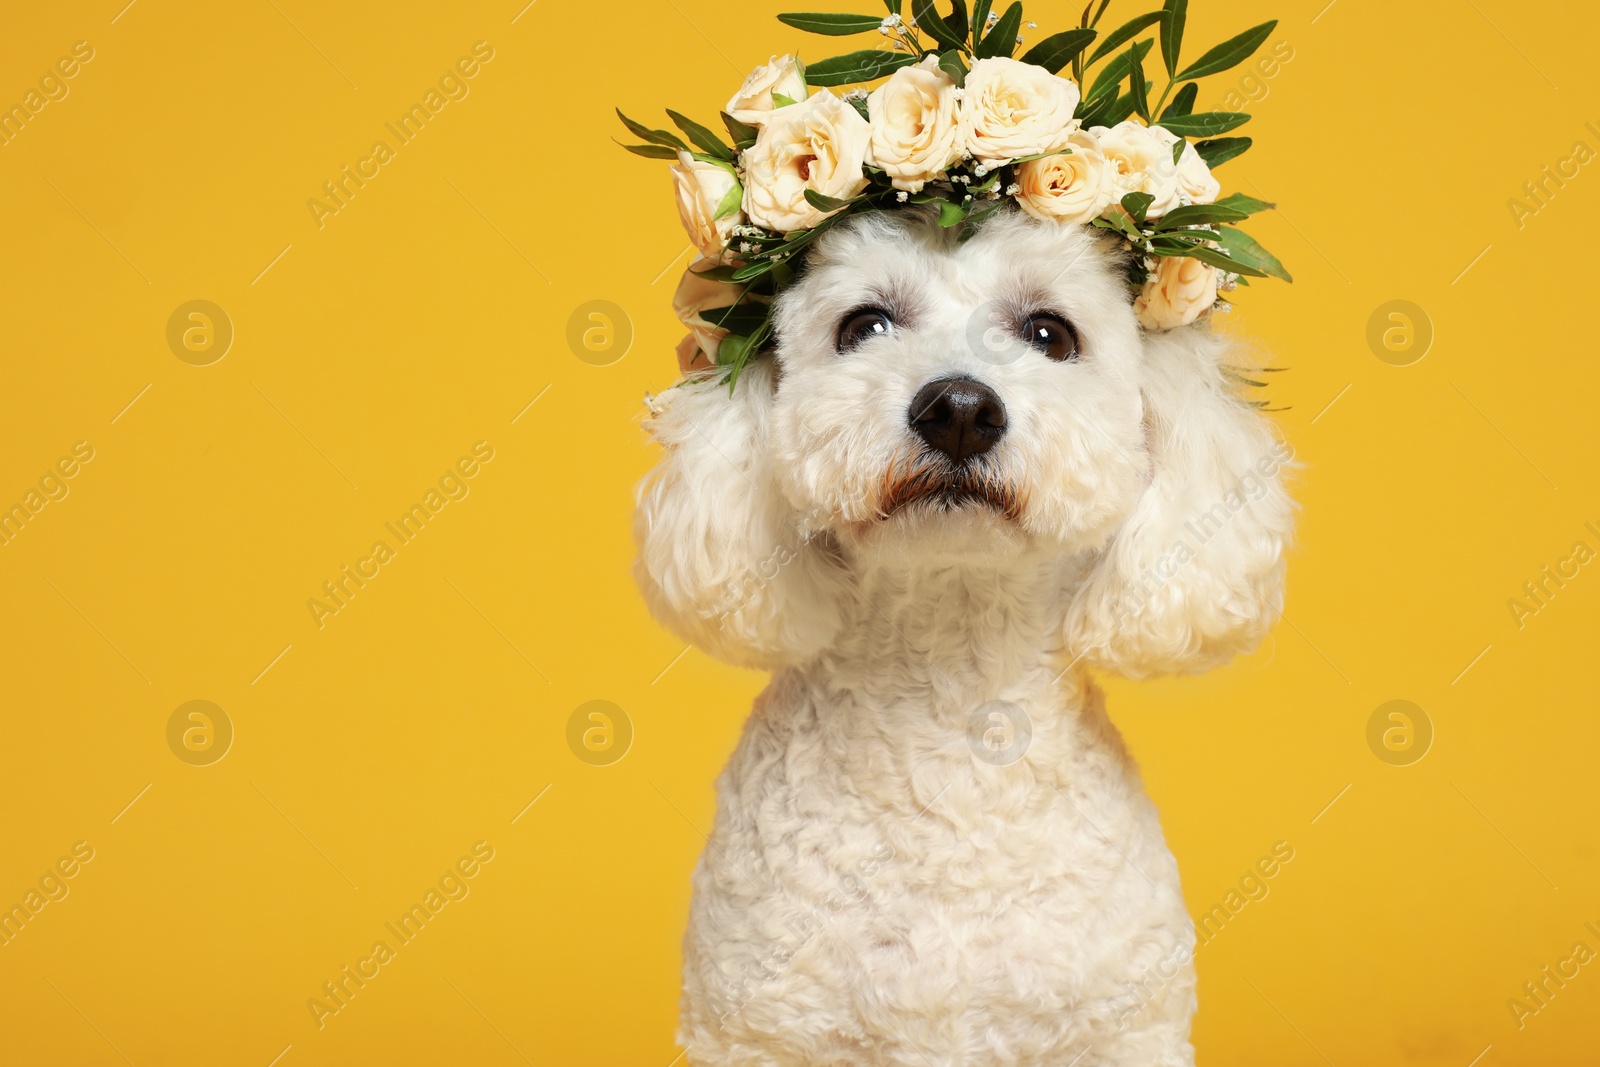 Photo of Adorable Bichon wearing wreath made of beautiful flowers on yellow background